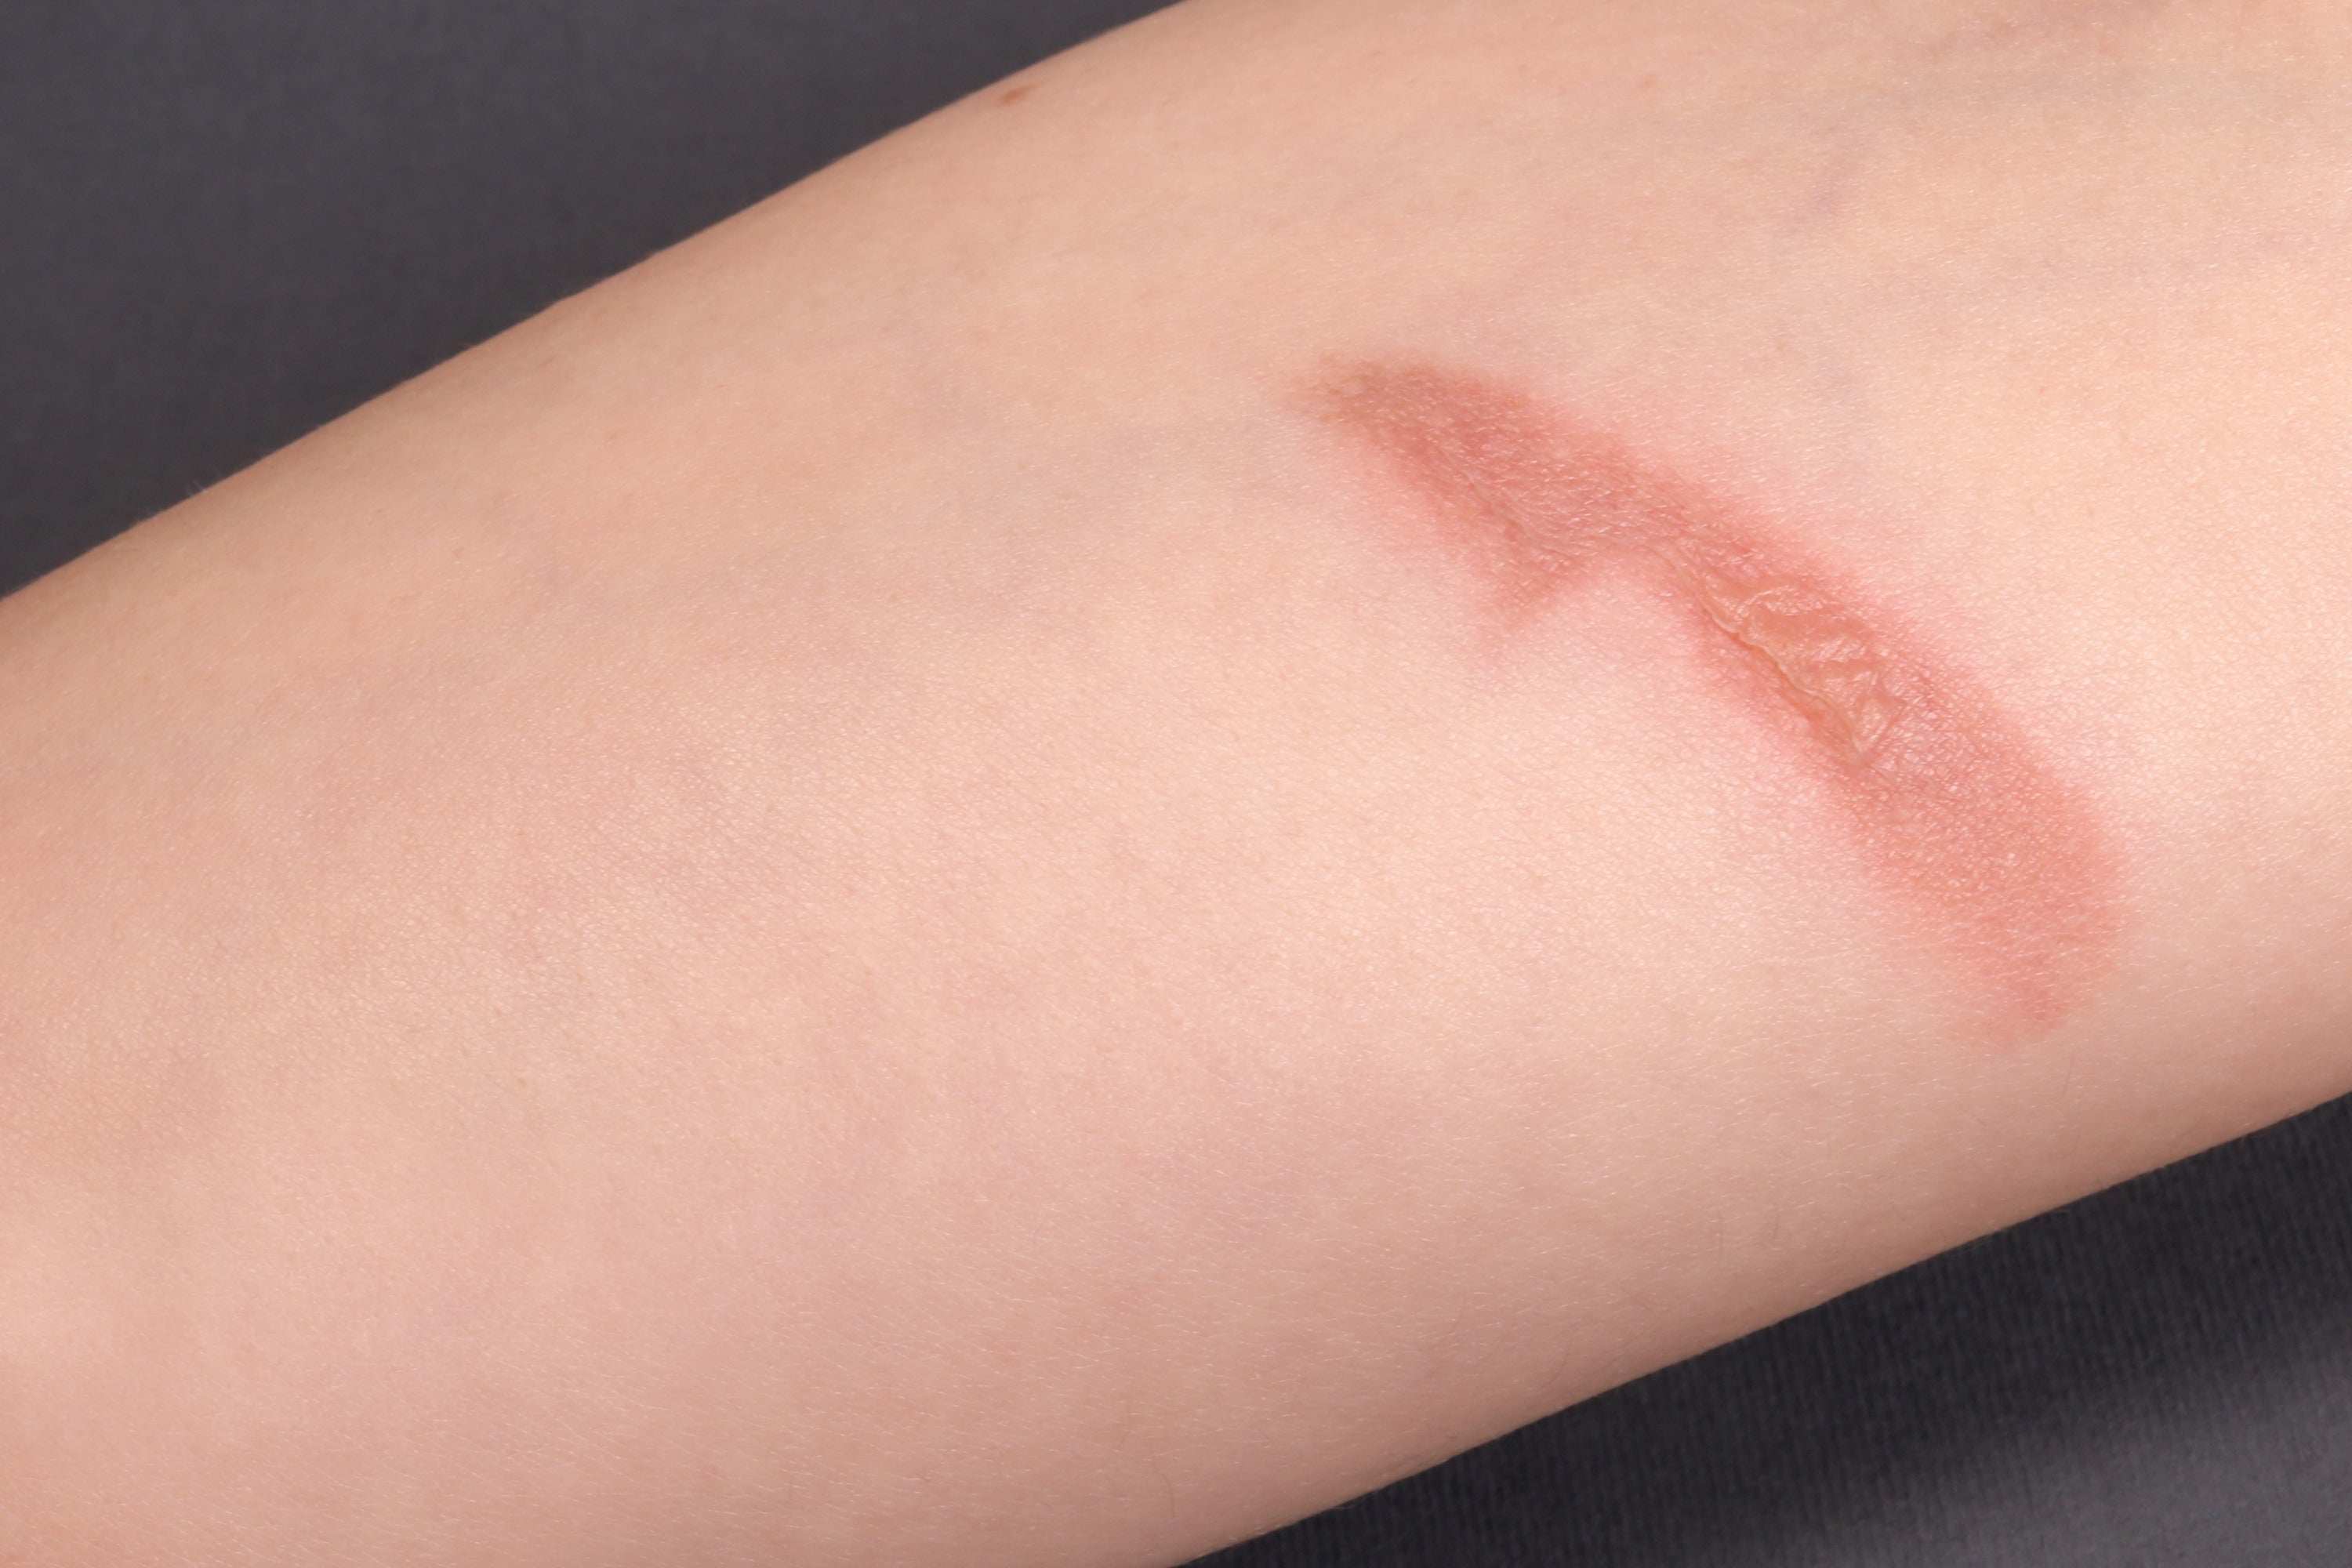 Recognizing and assessing second degree burns